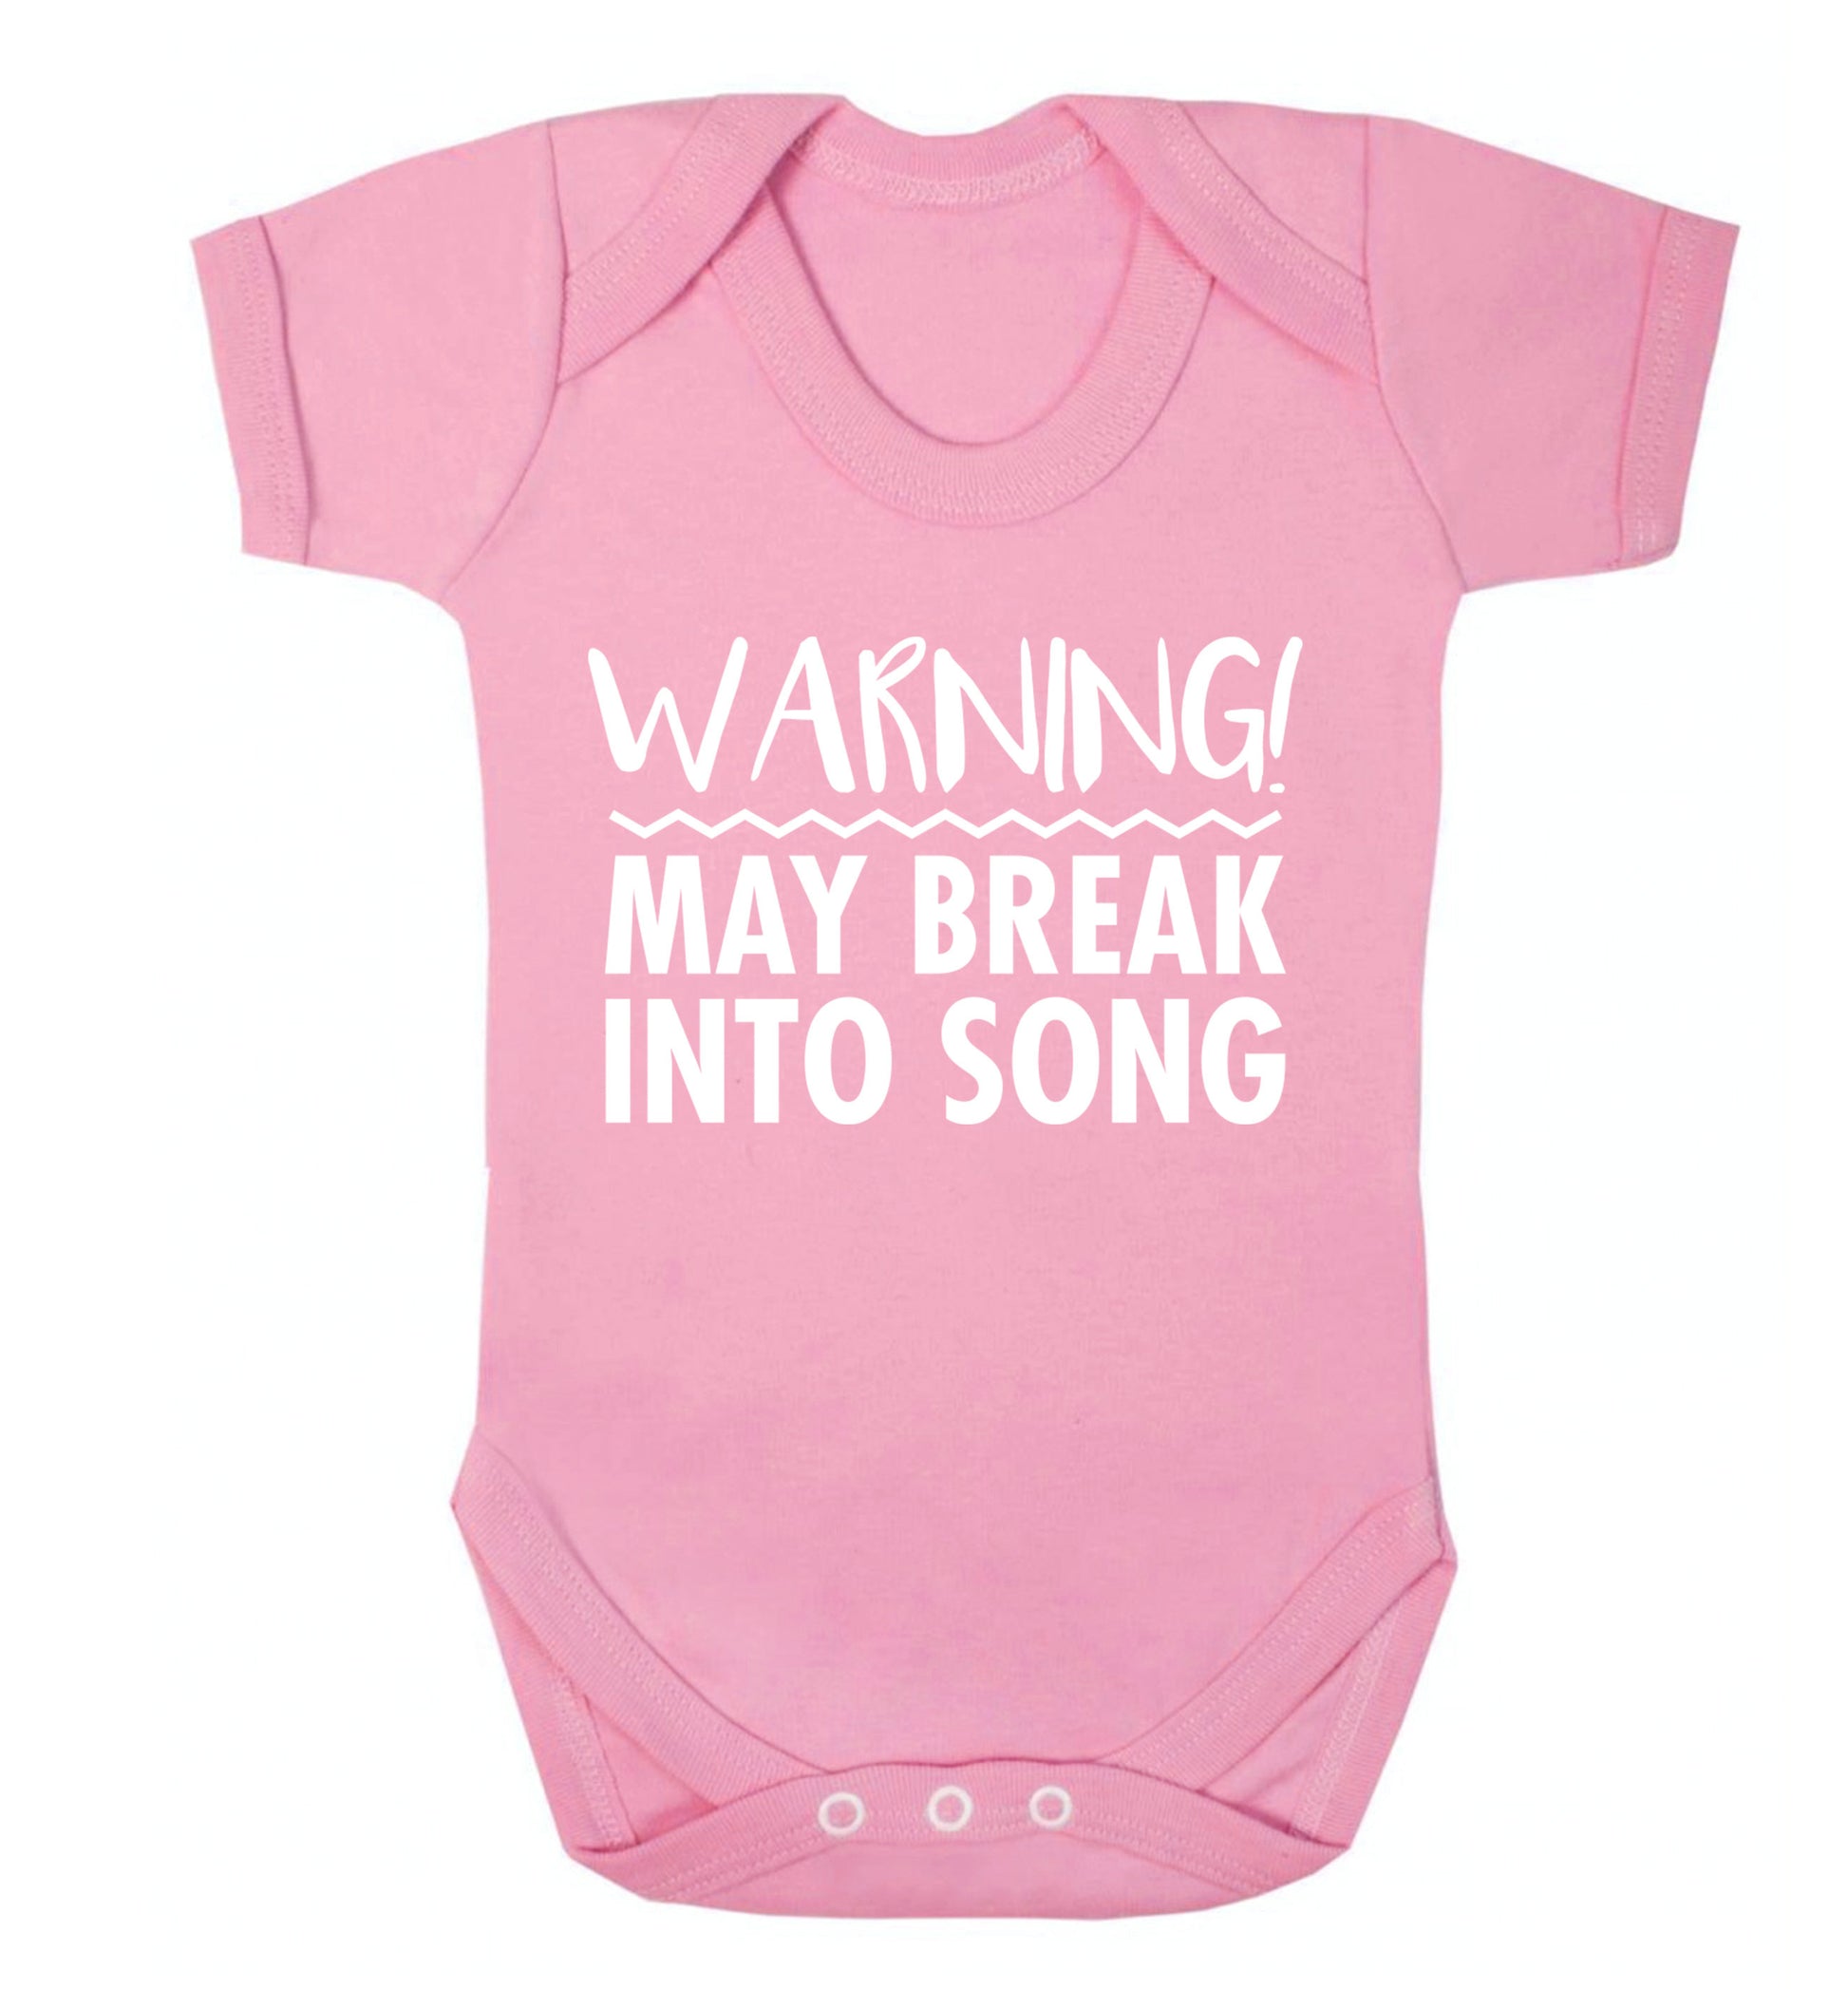 Warning may break into song Baby Vest pale pink 18-24 months